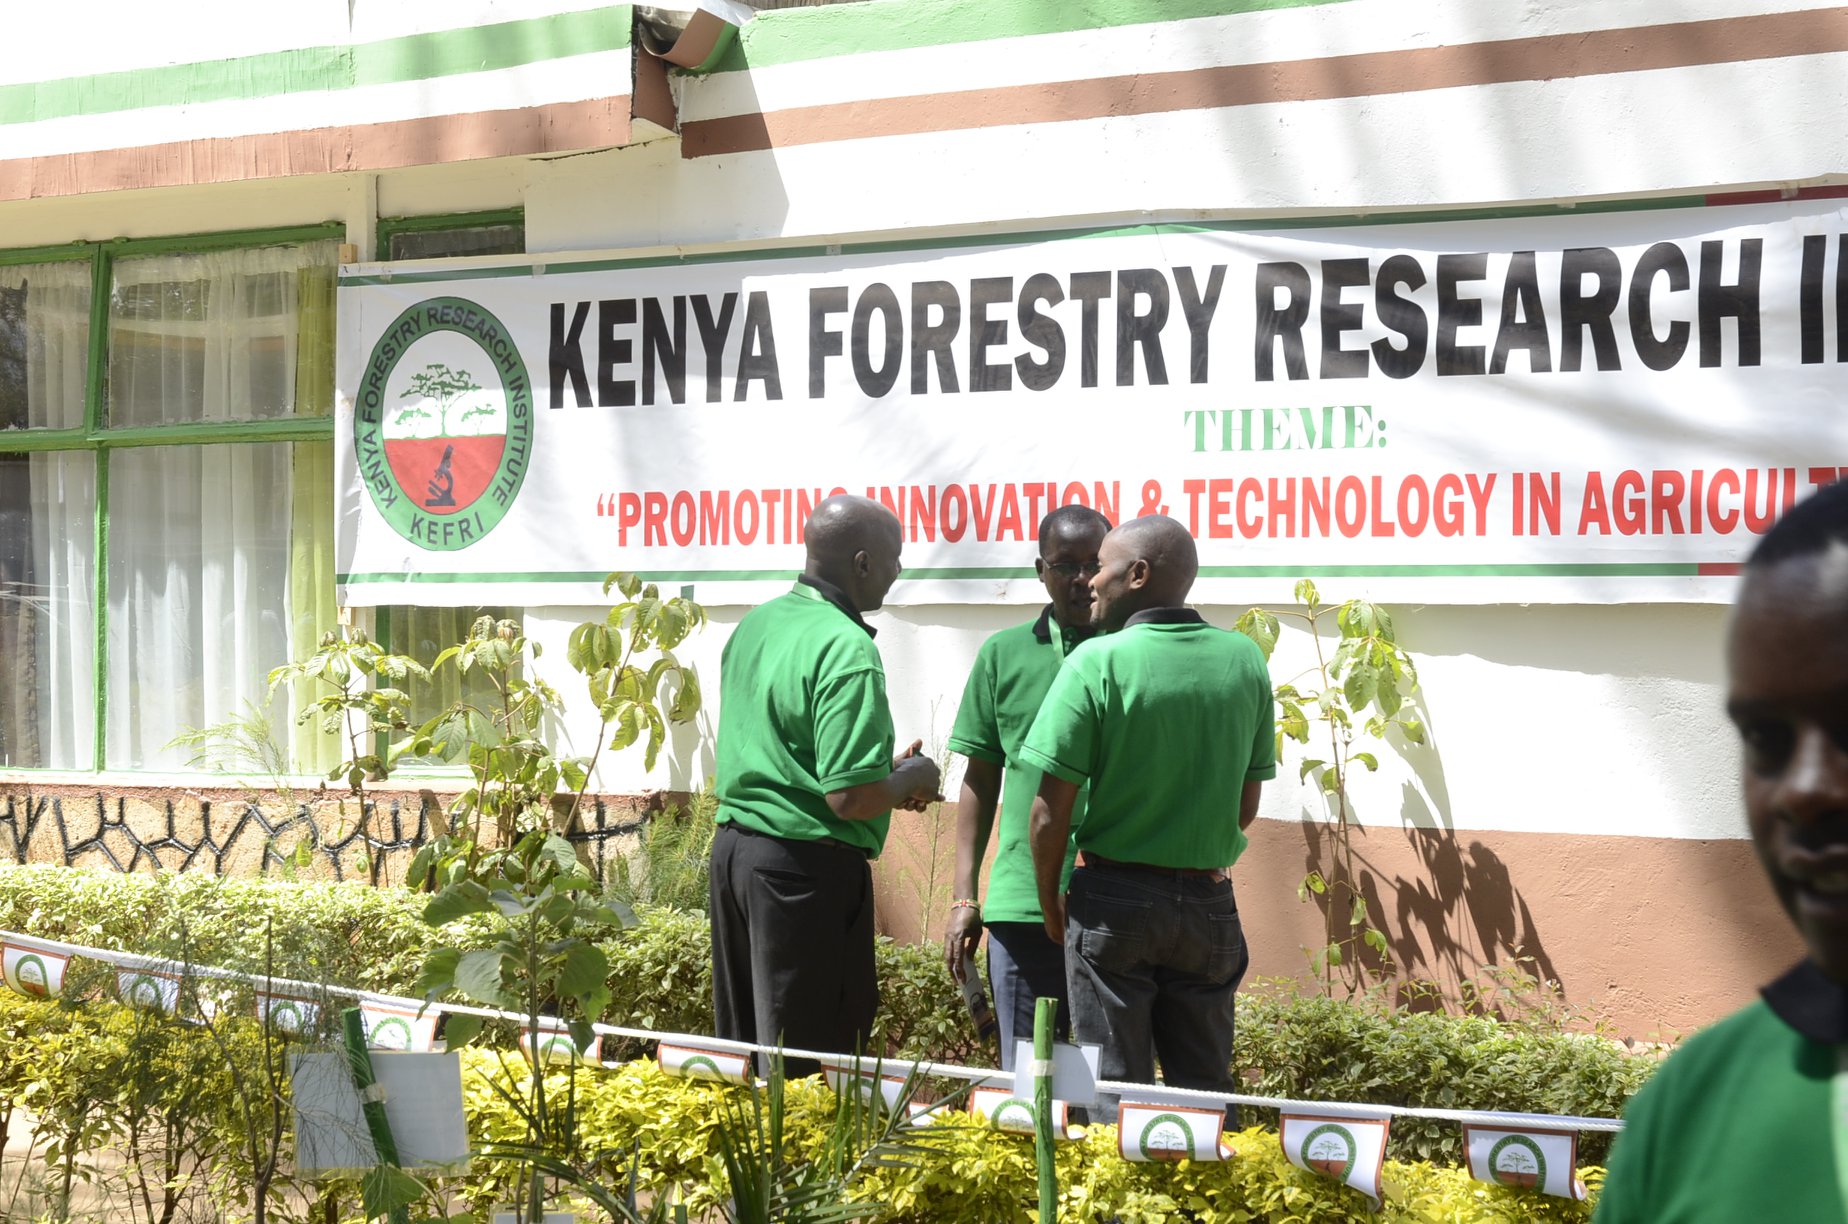 Kenya Forest Research Institute officials at work.